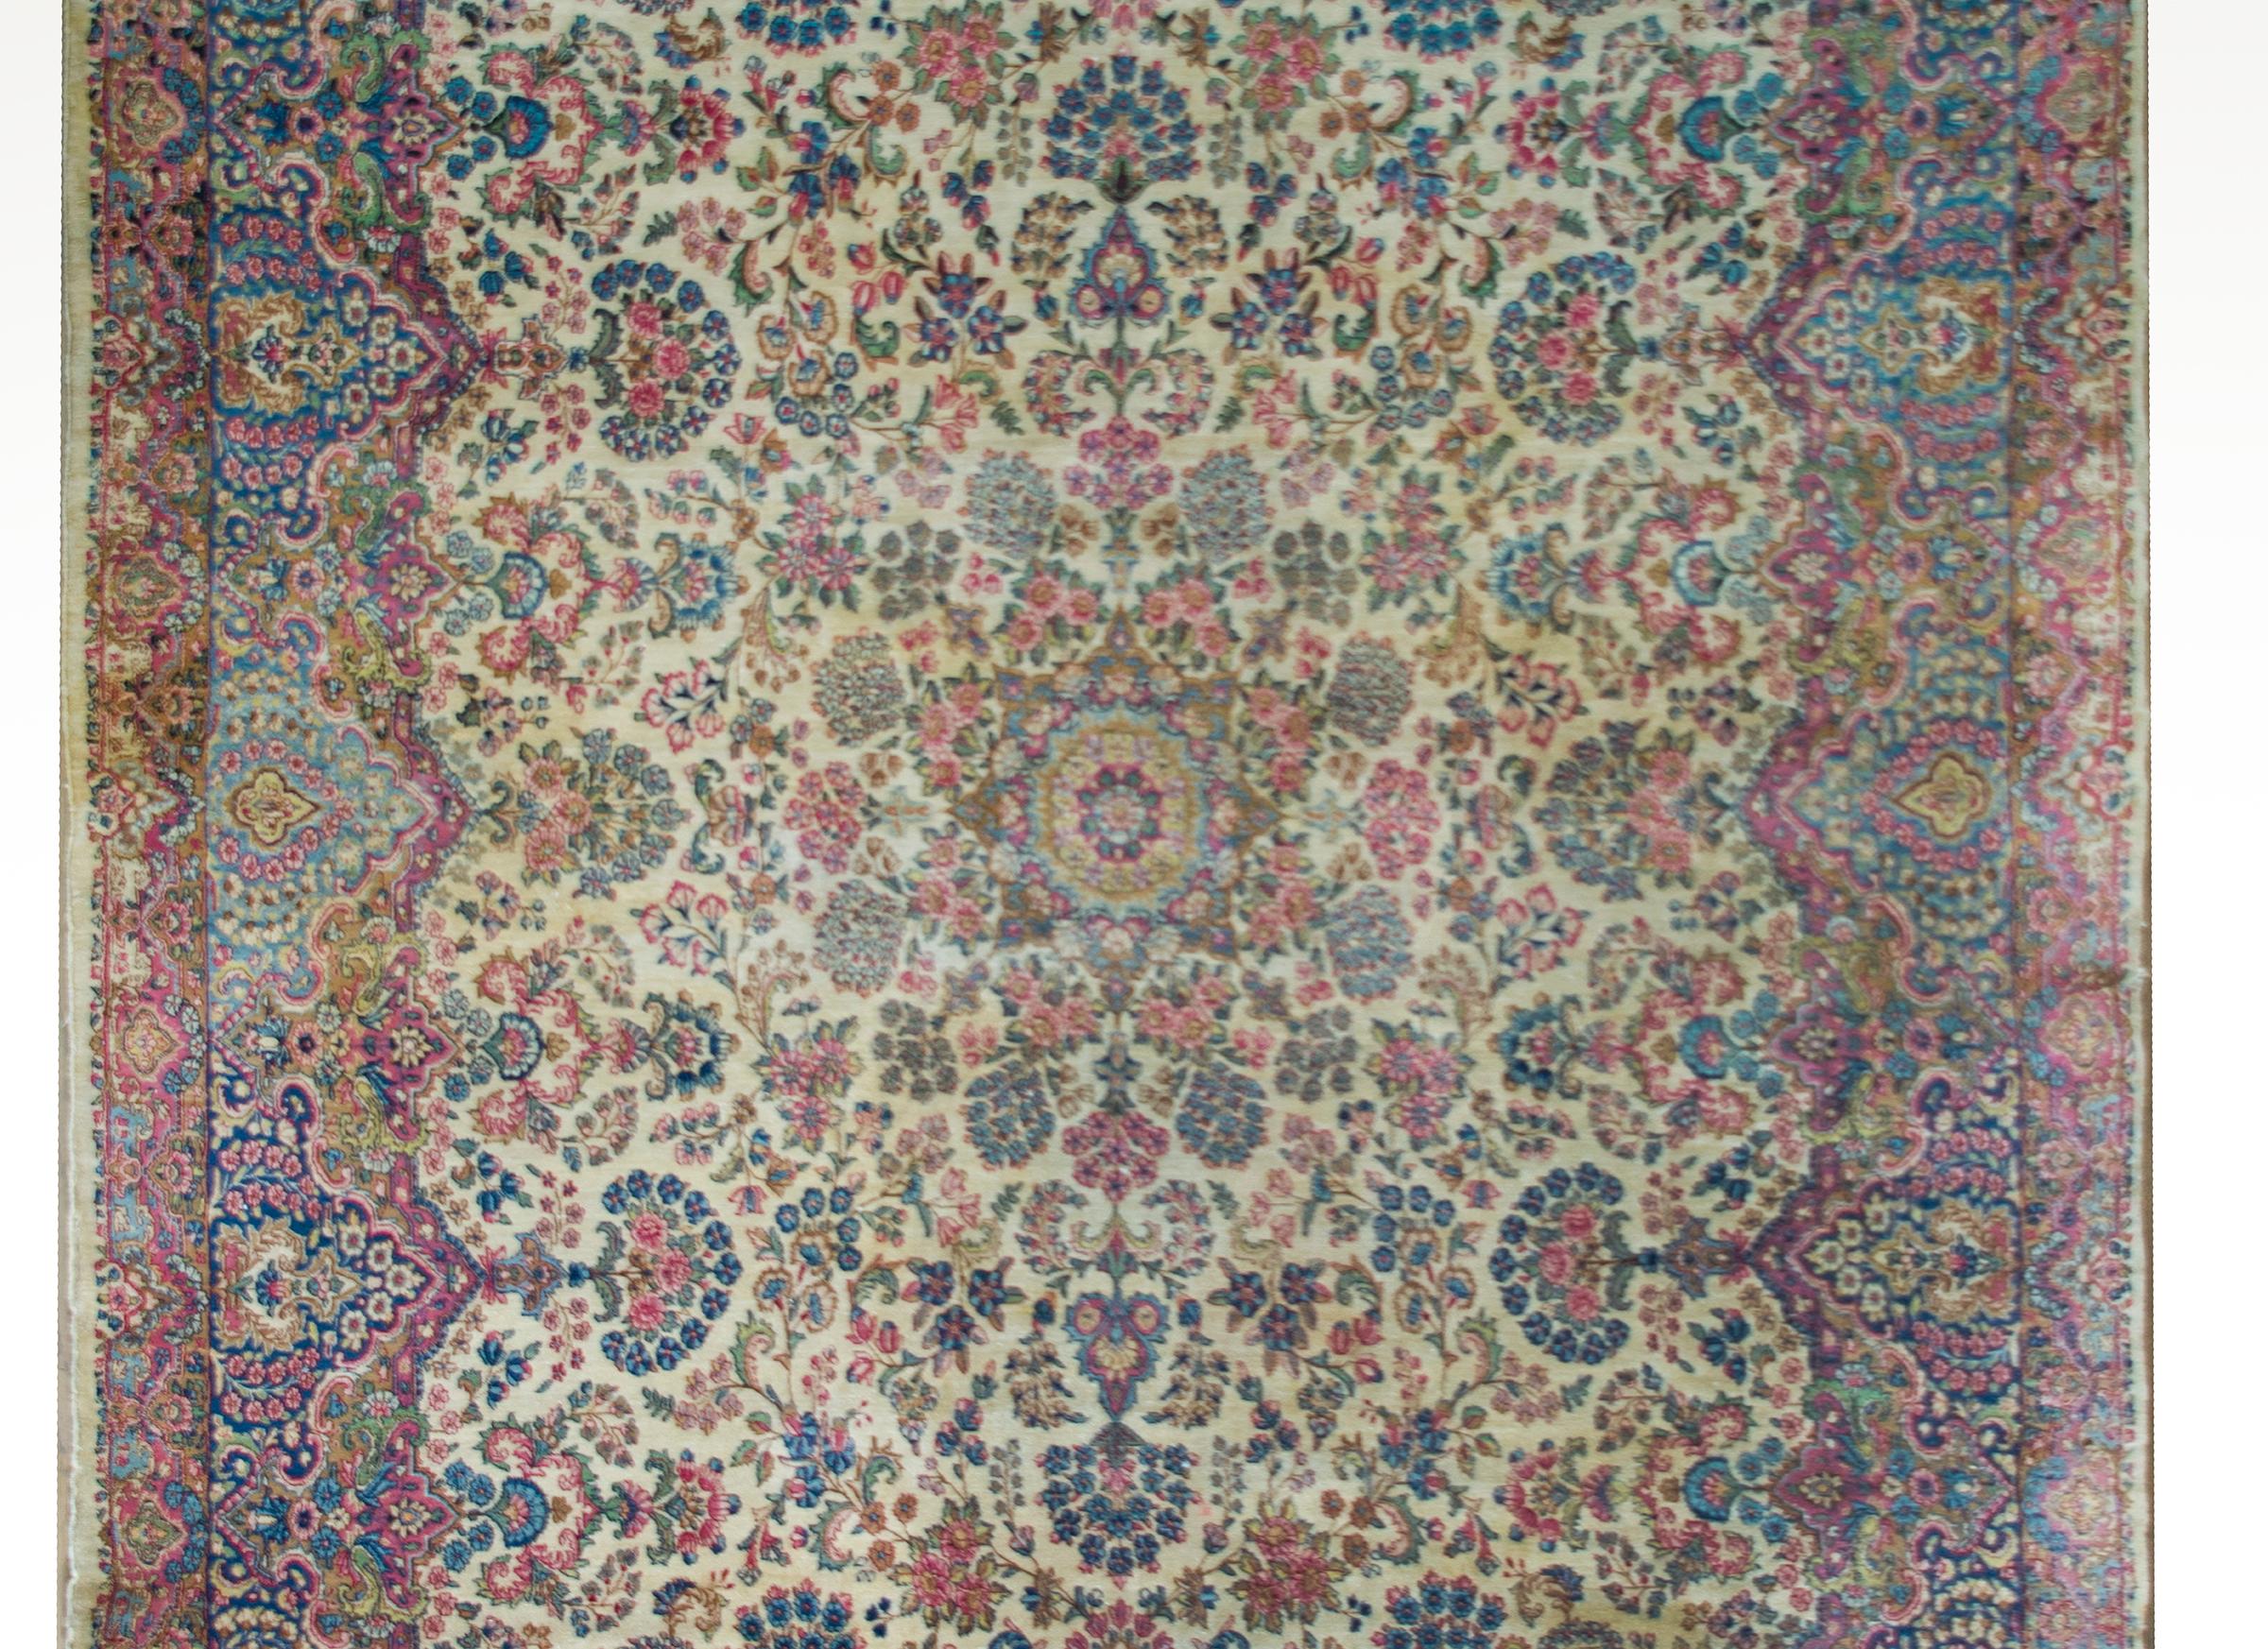 A mesmerizing early 20th century Persian Kirman rug with an all-over kaleidoscope of a pattern containing myriad floral clusters woven in traditional Kirman colors including pink, crimson, green, and light and dark indigo, and set against a cream